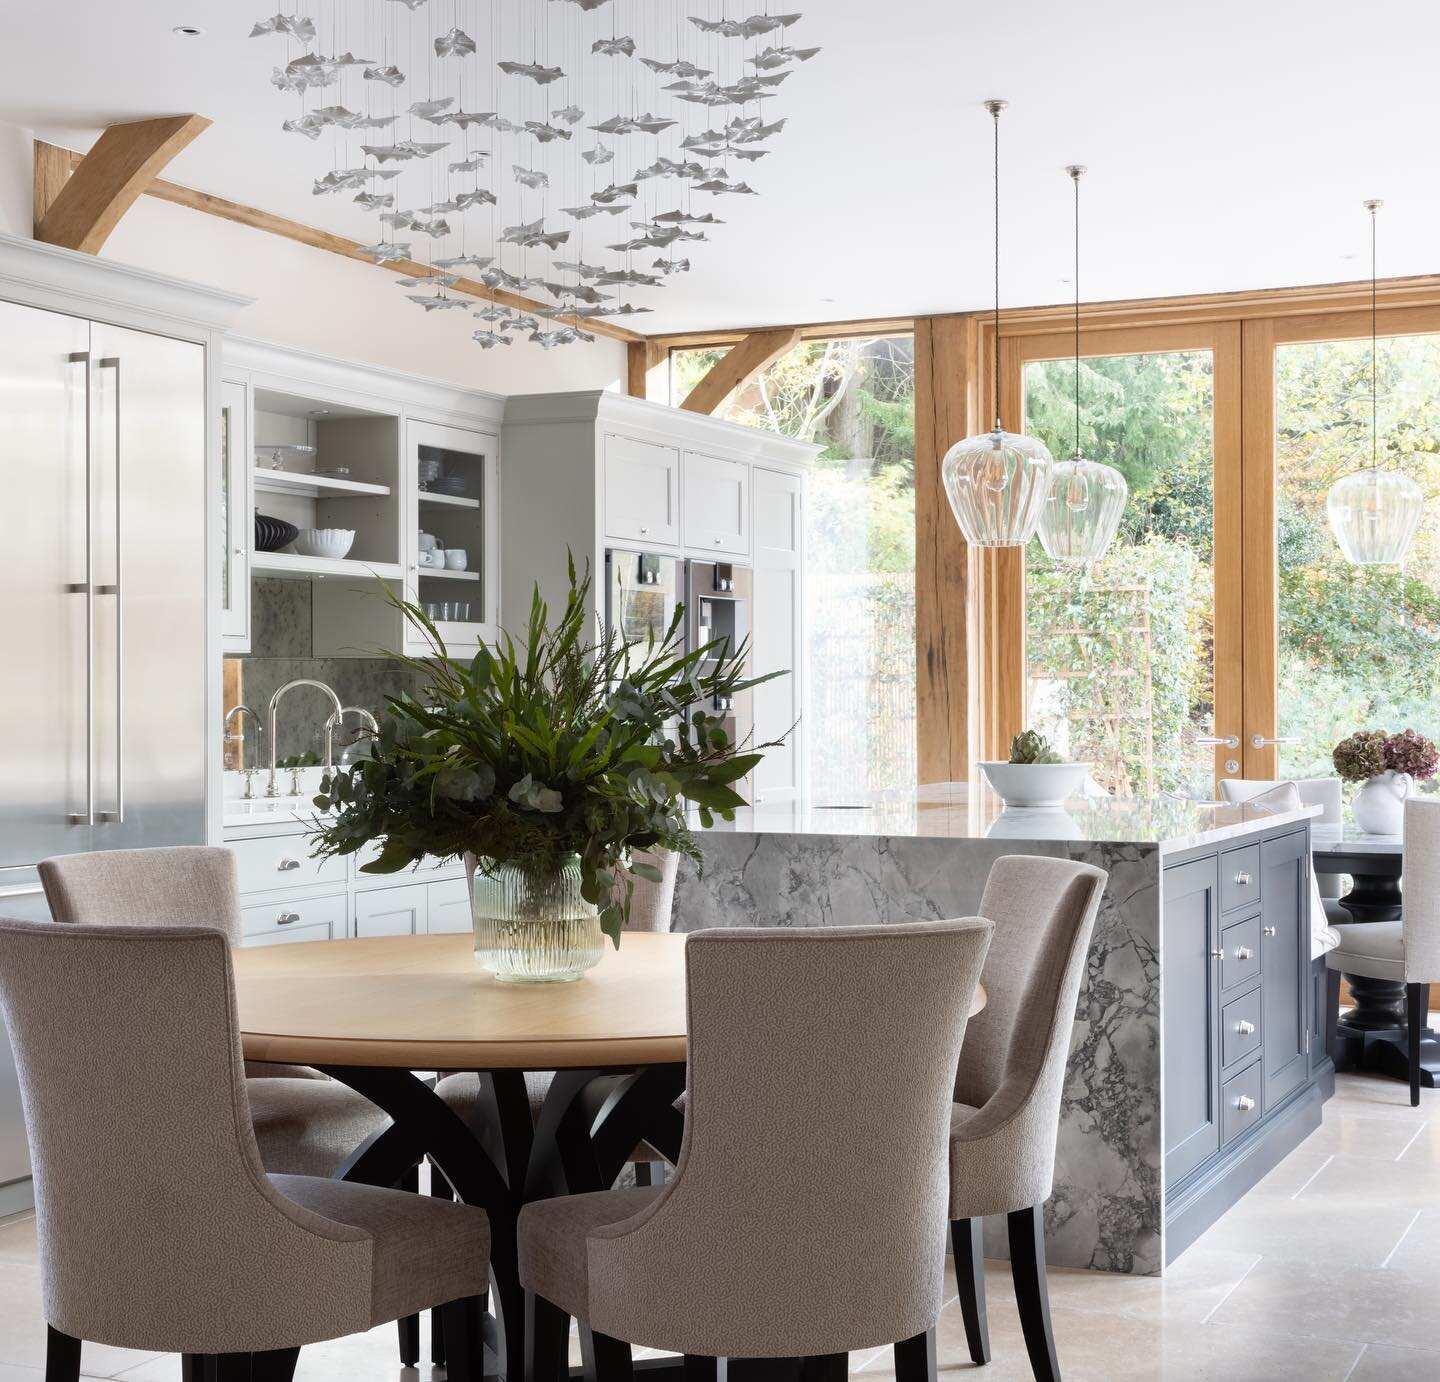 Every project takes a village&hellip; as Designers we&rsquo;re here to help you through the process and work with the construction team to ensure your project is picture perfect! 

The first image of the Woburn kitchen is the final result followed by